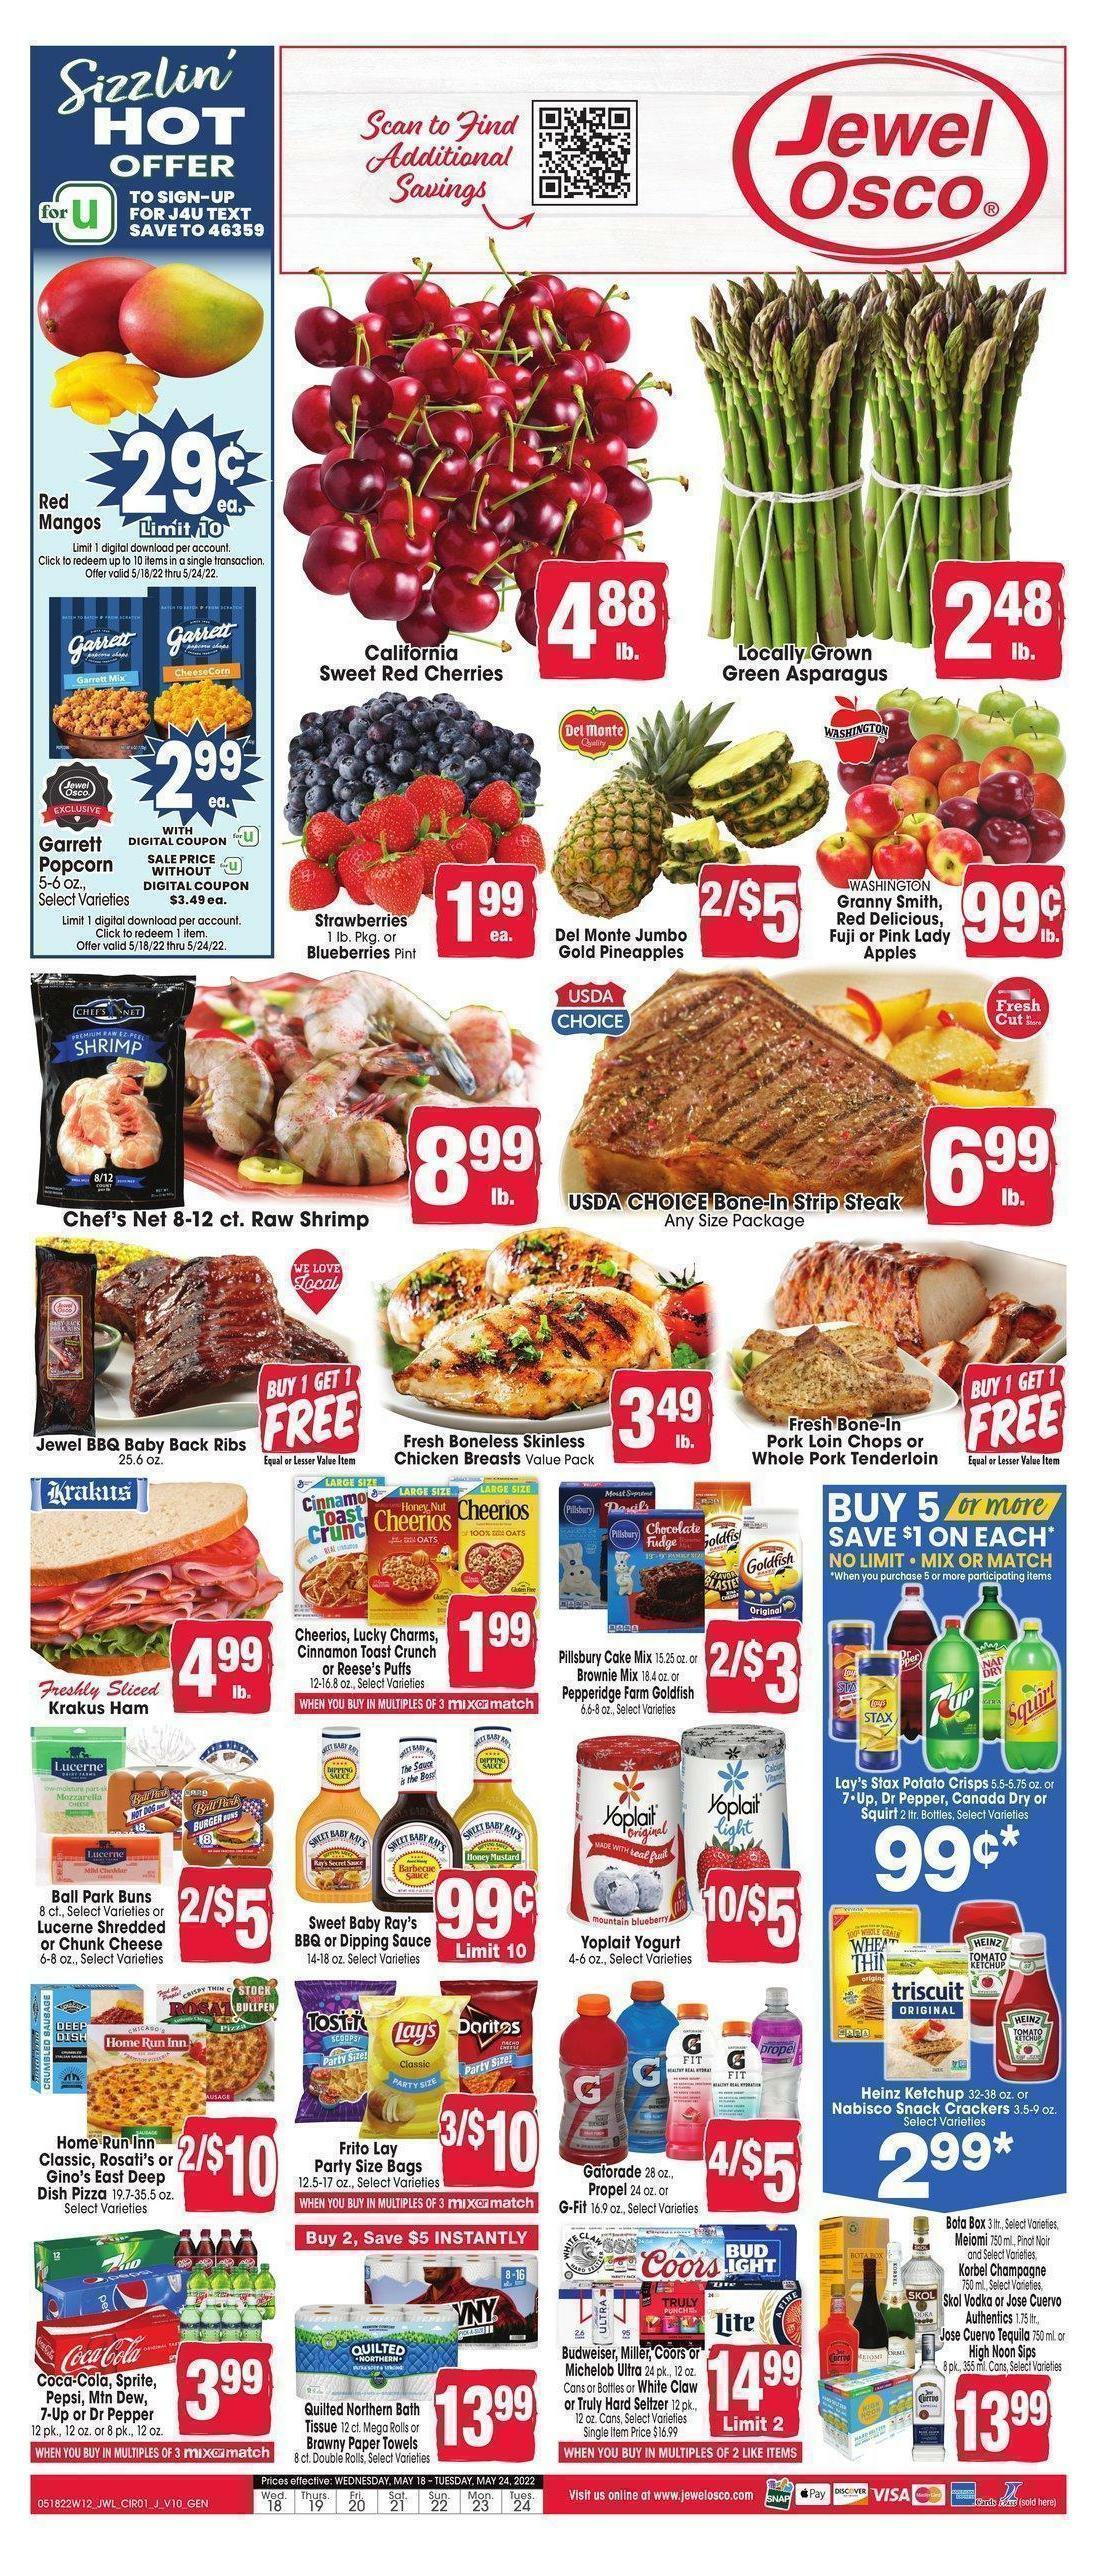 Jewel Osco Weekly Ad from May 18